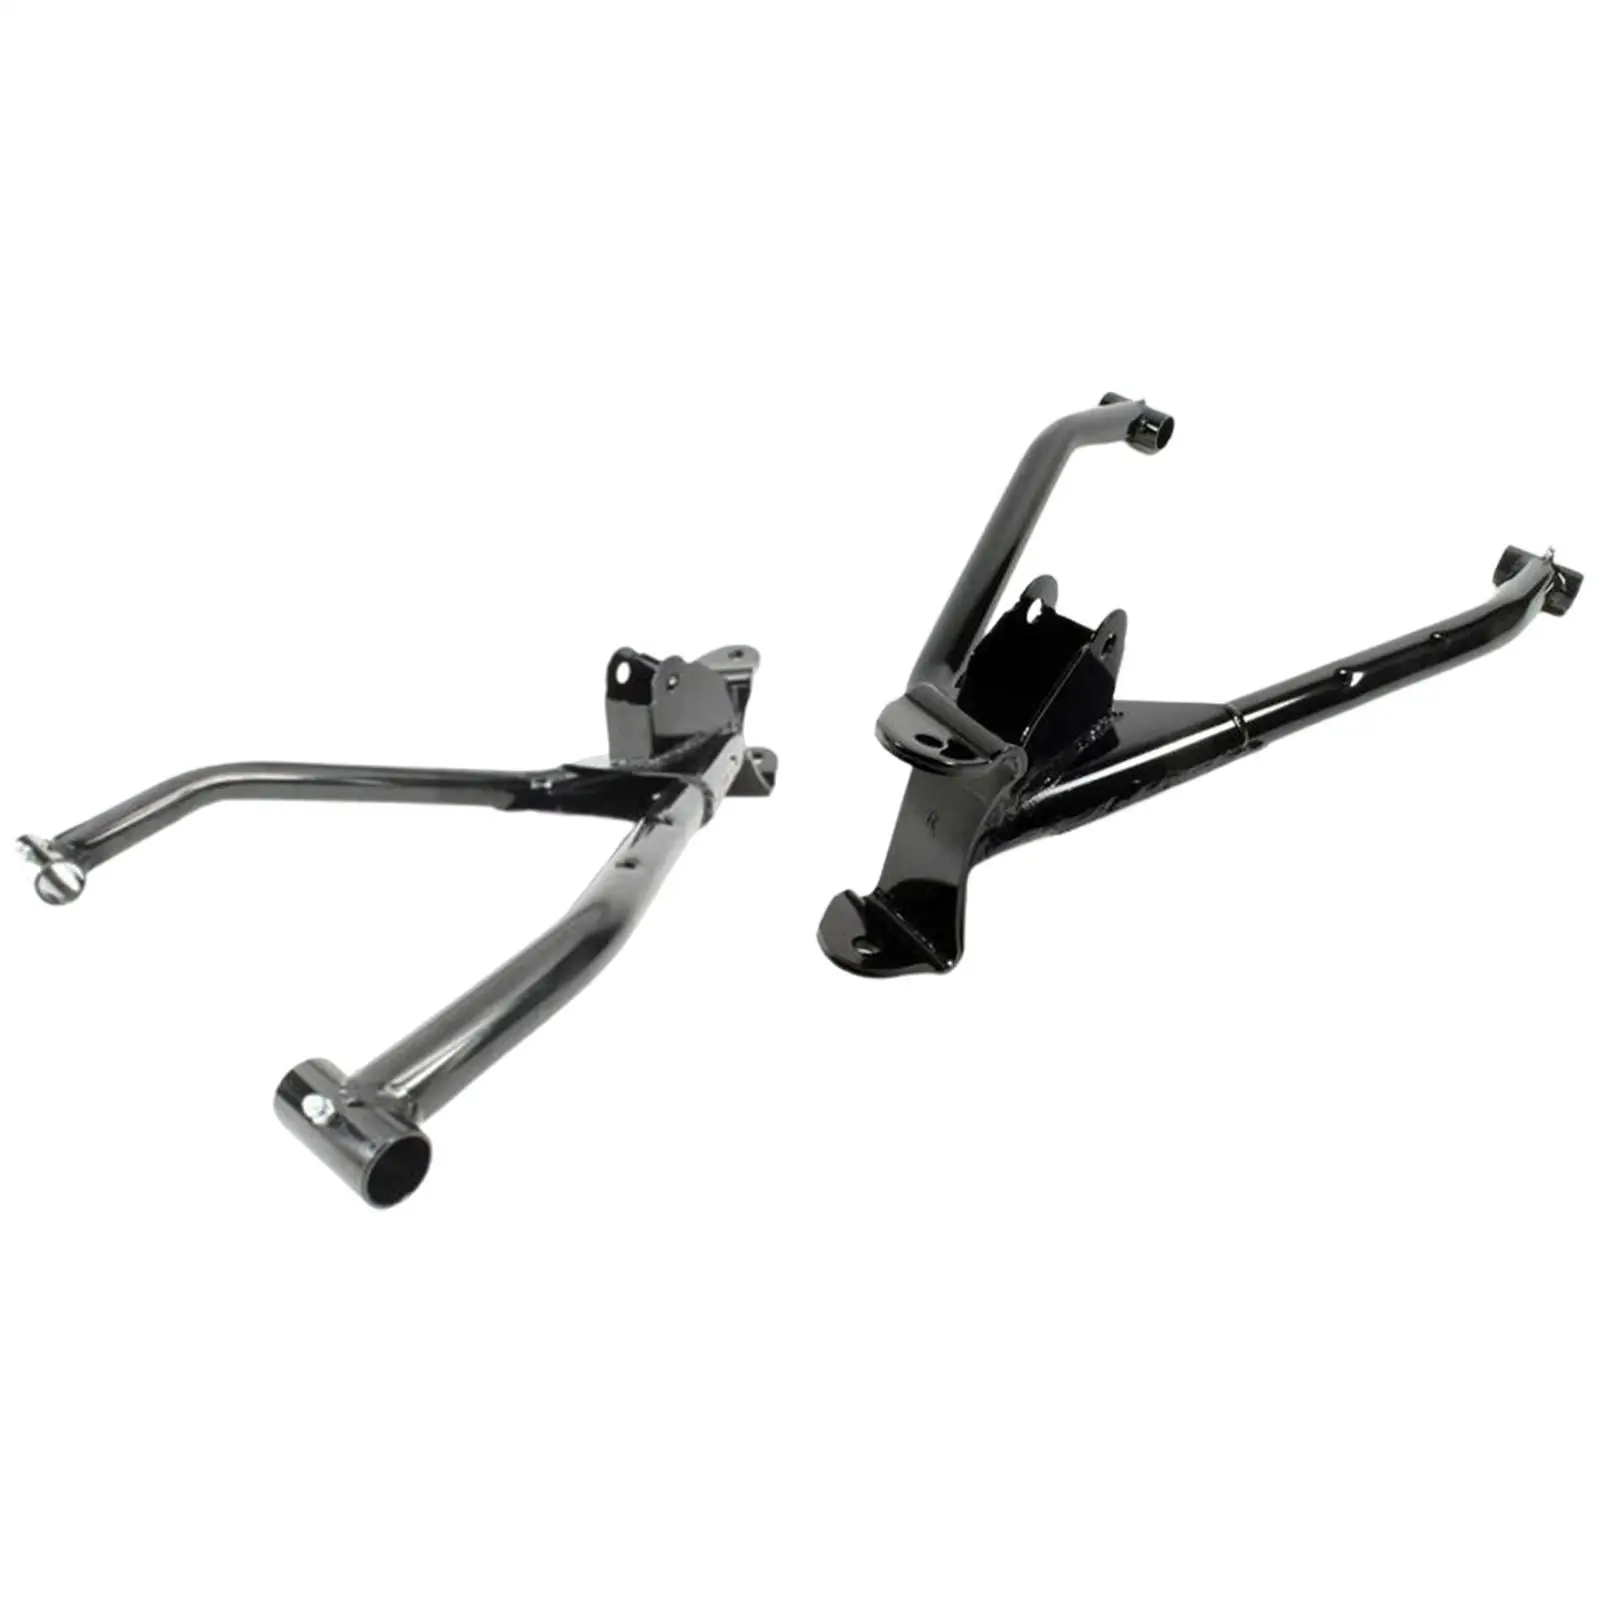 Front Control Arm Assembly Durable for Polaris RZR 170 2009-2021 ATV Spare Parts Good Performance Convenient Installation